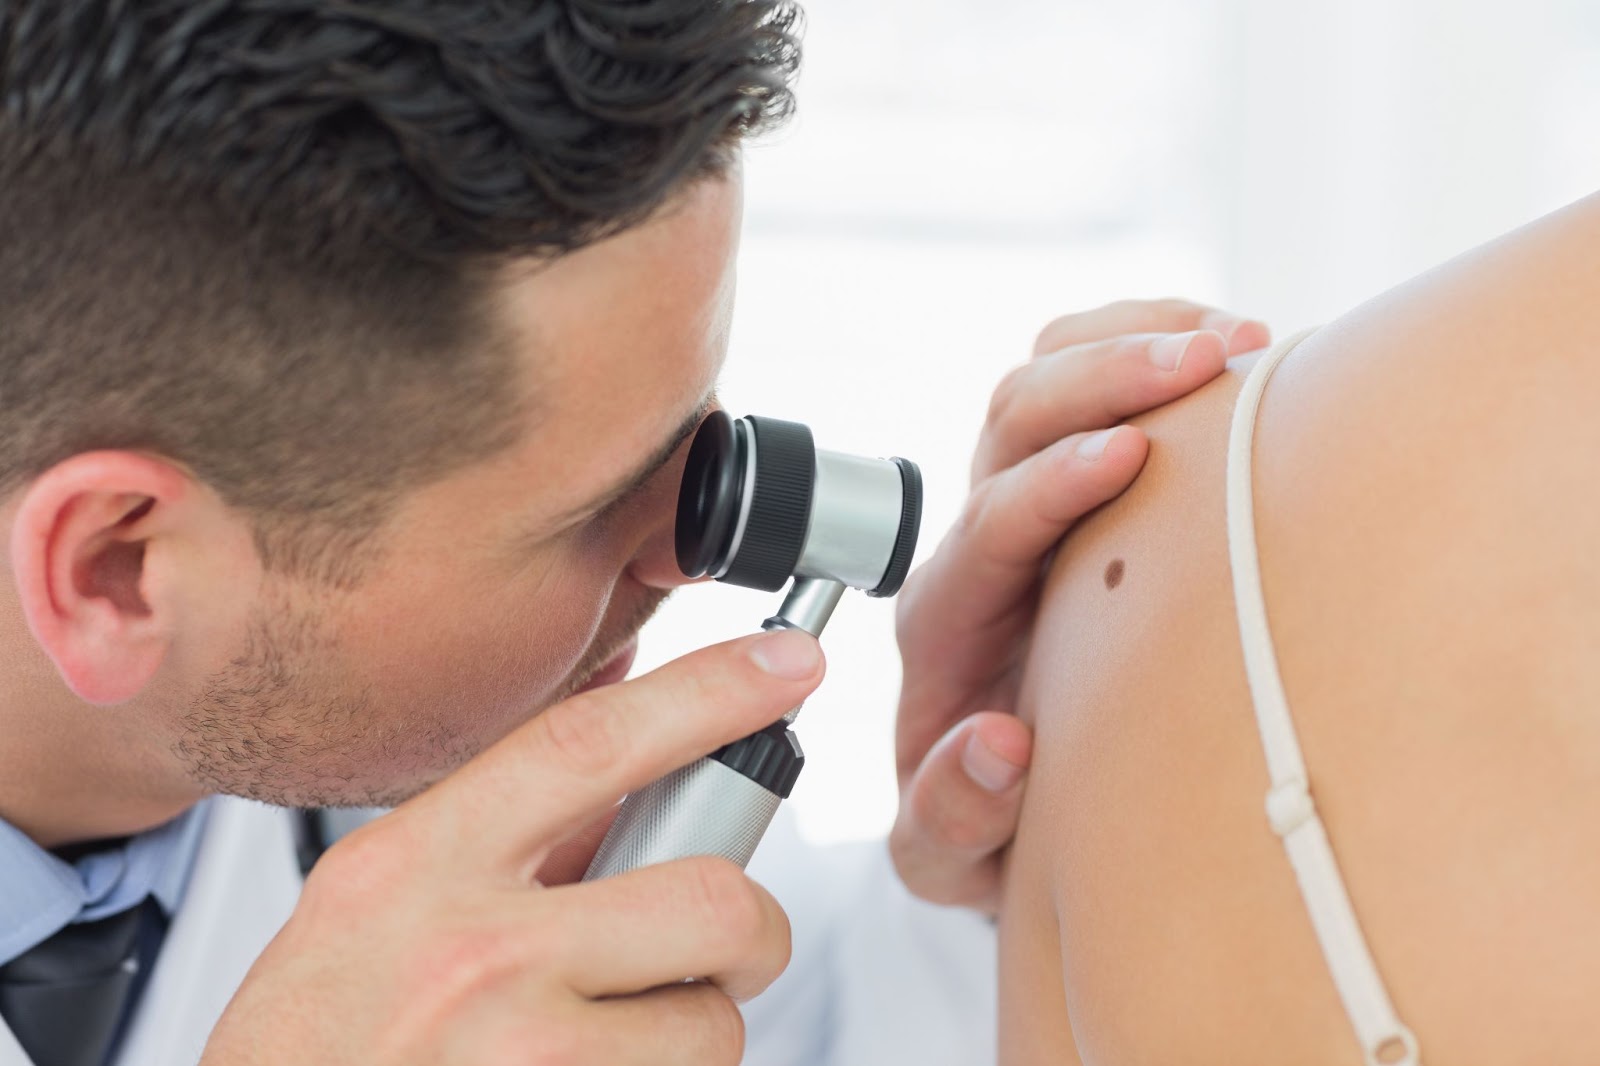 How To Check For Skin Cancer At Home Skin Check